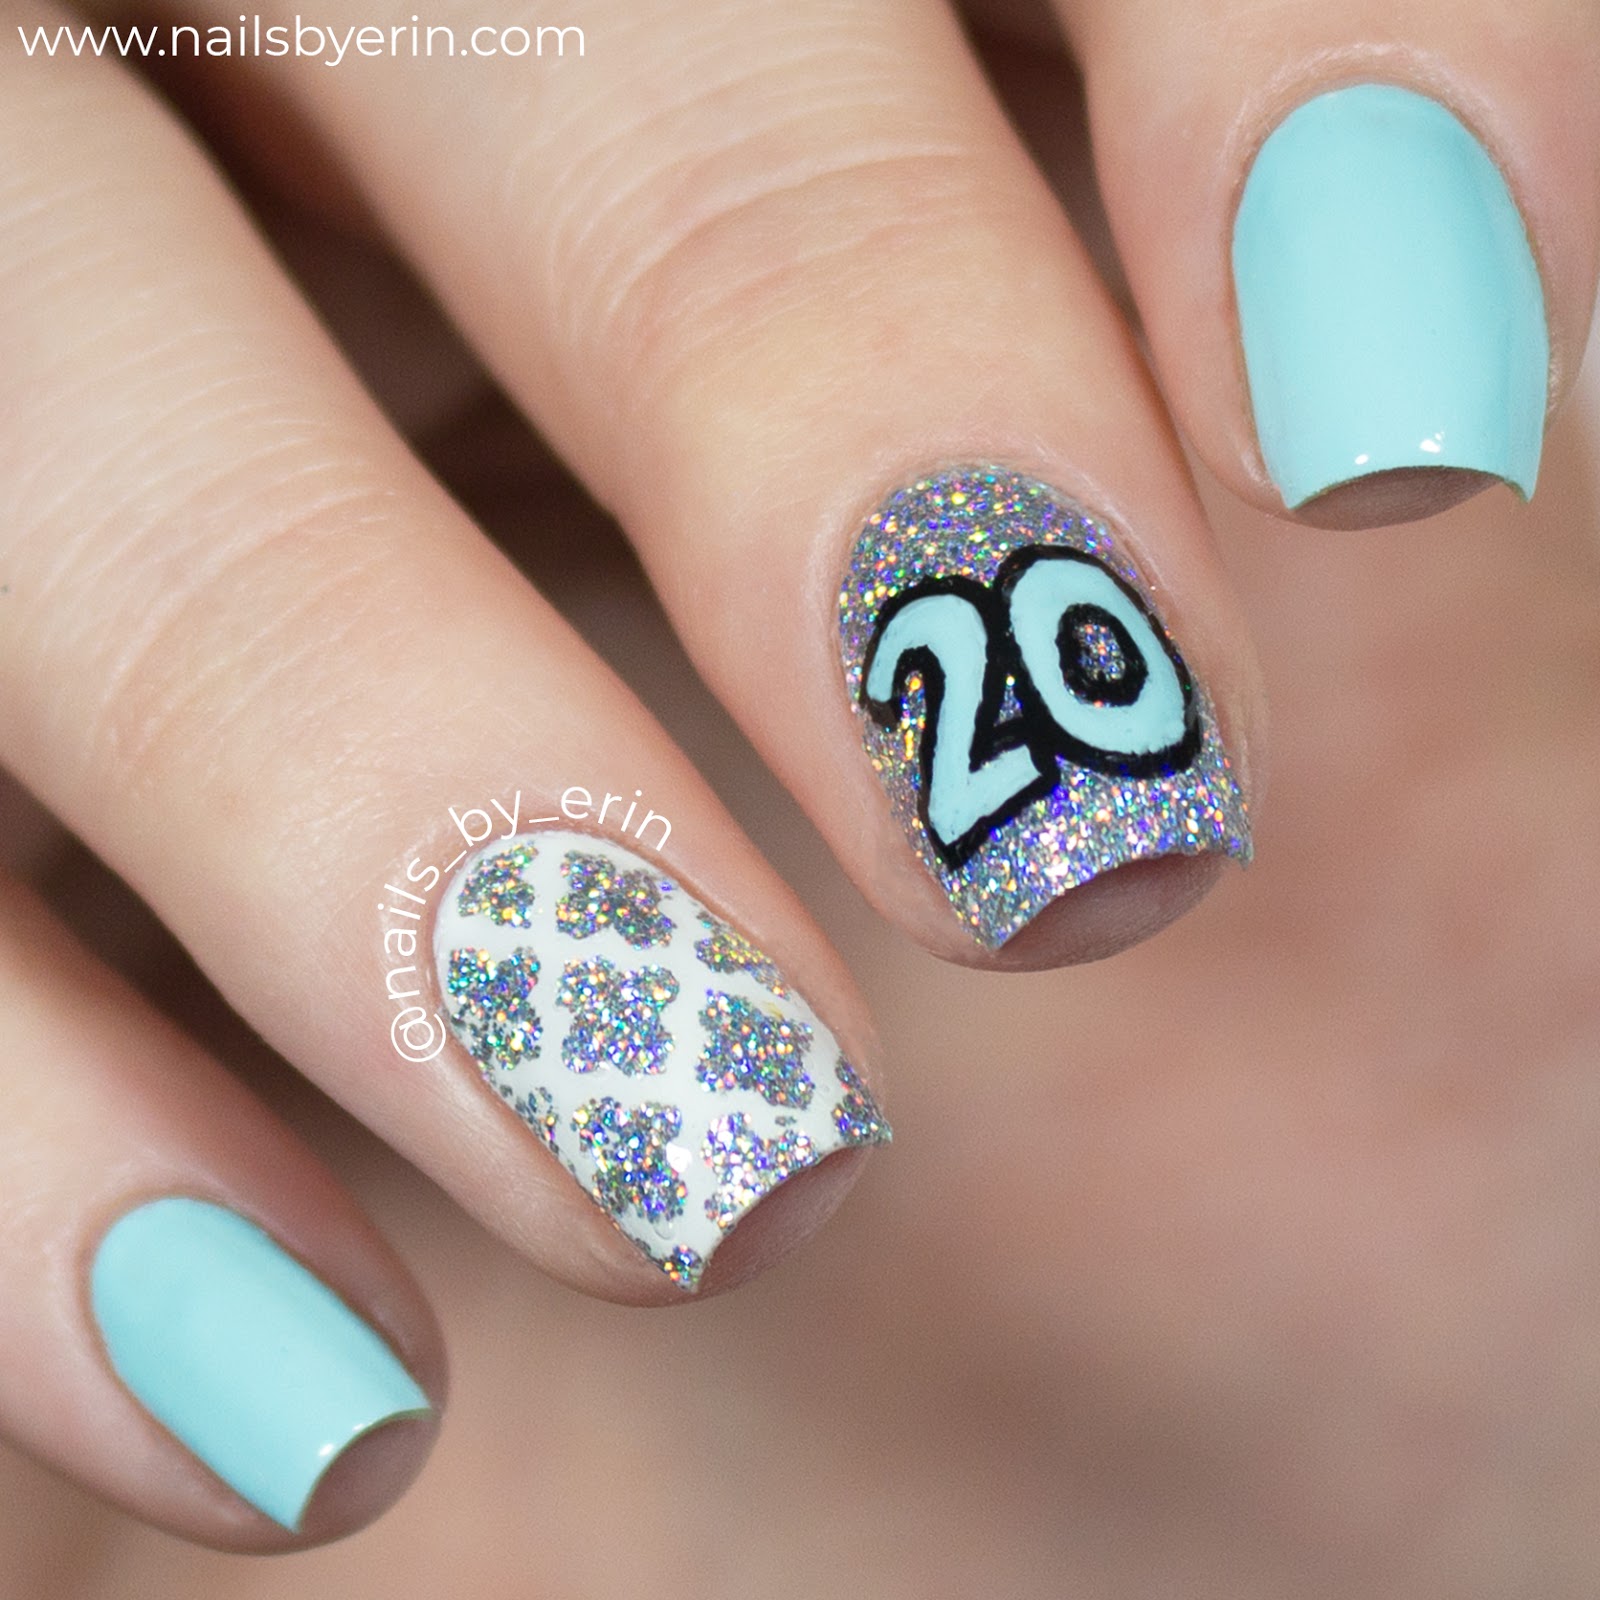 In Love With My Birthday Nails | joey'space